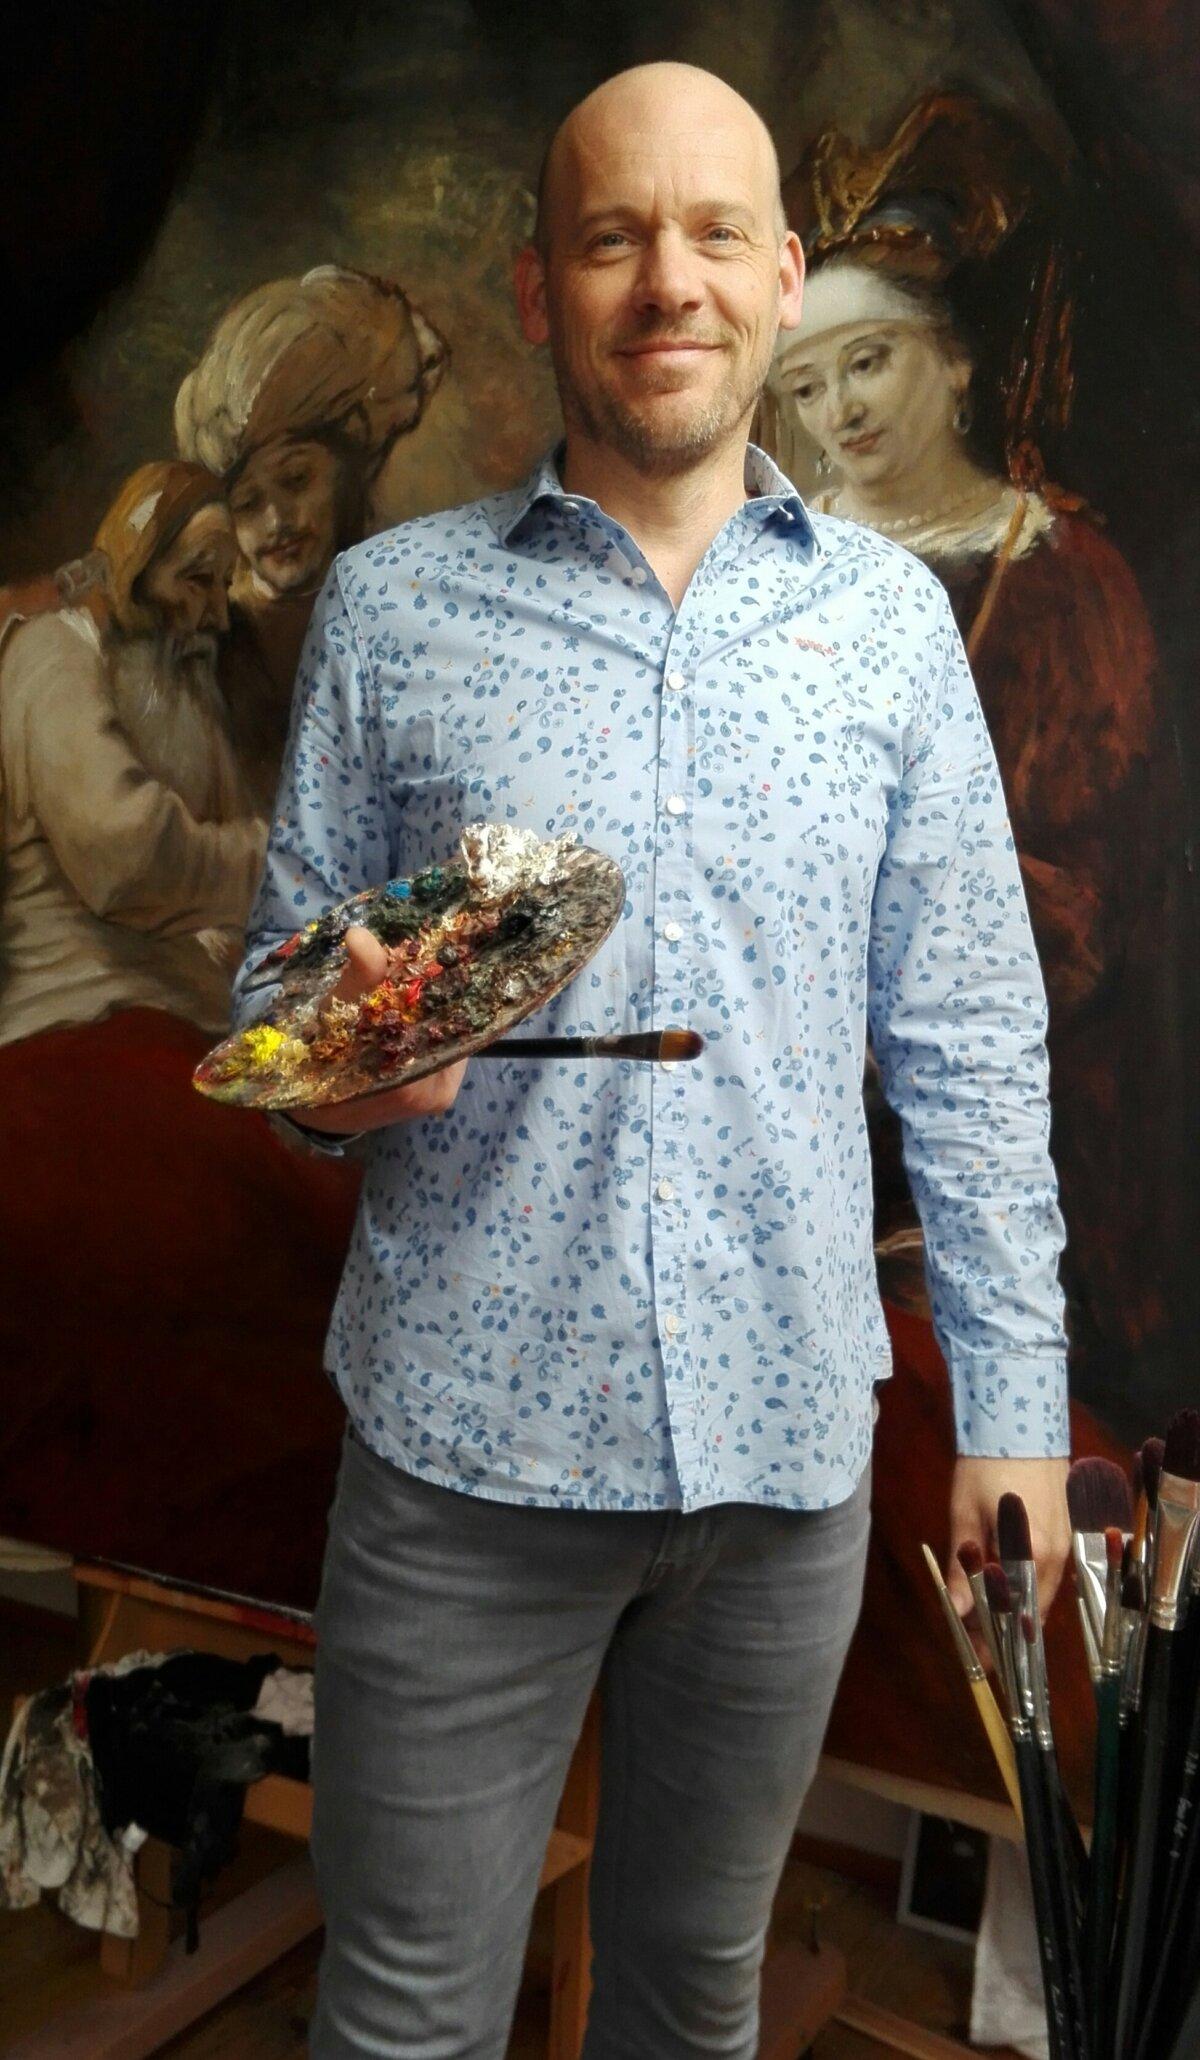 Artist Nard Kwast loves painting in the 17th-century style. He stands in front of a commissioned reproduction of Rembrandt's "Jacob Blessing the Sons of Joseph." (Courtesy of Nard Kwast)